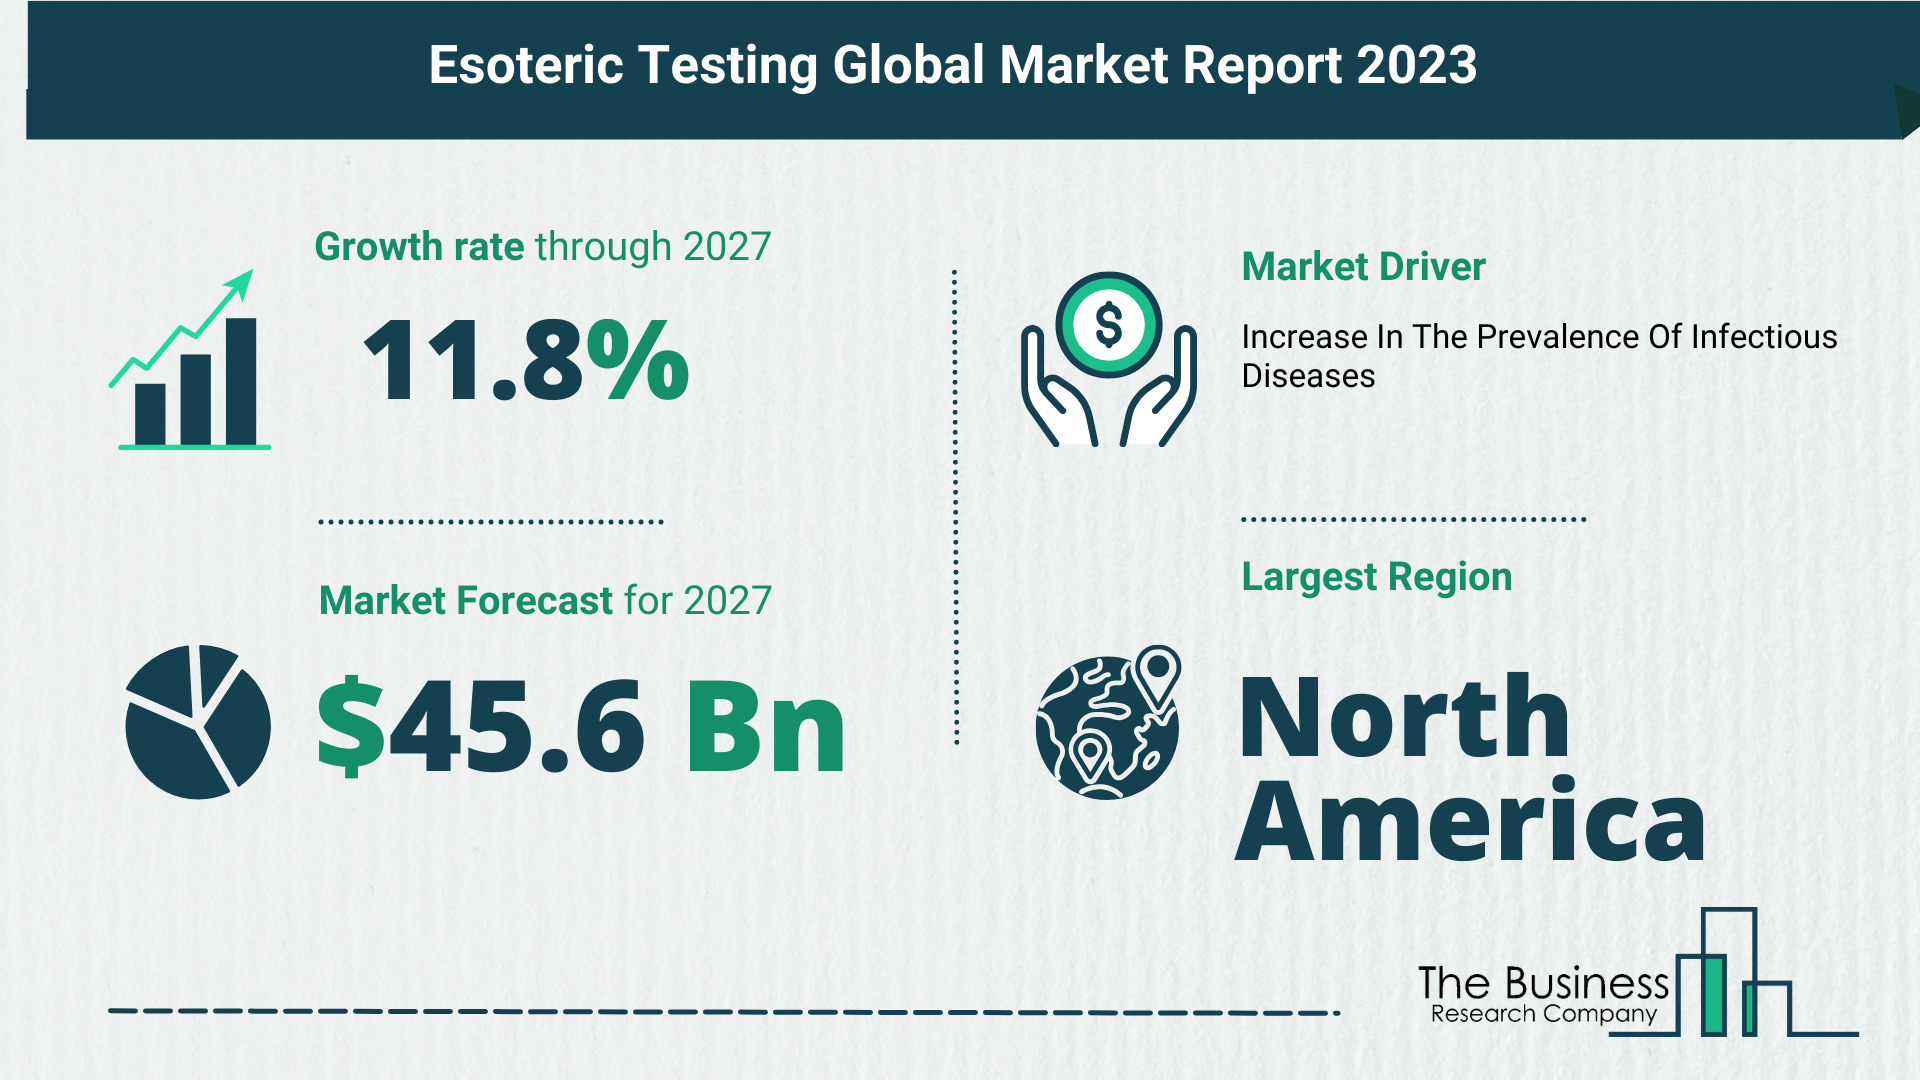 Top 5 Insights From The Esoteric Testing Market Report 2023